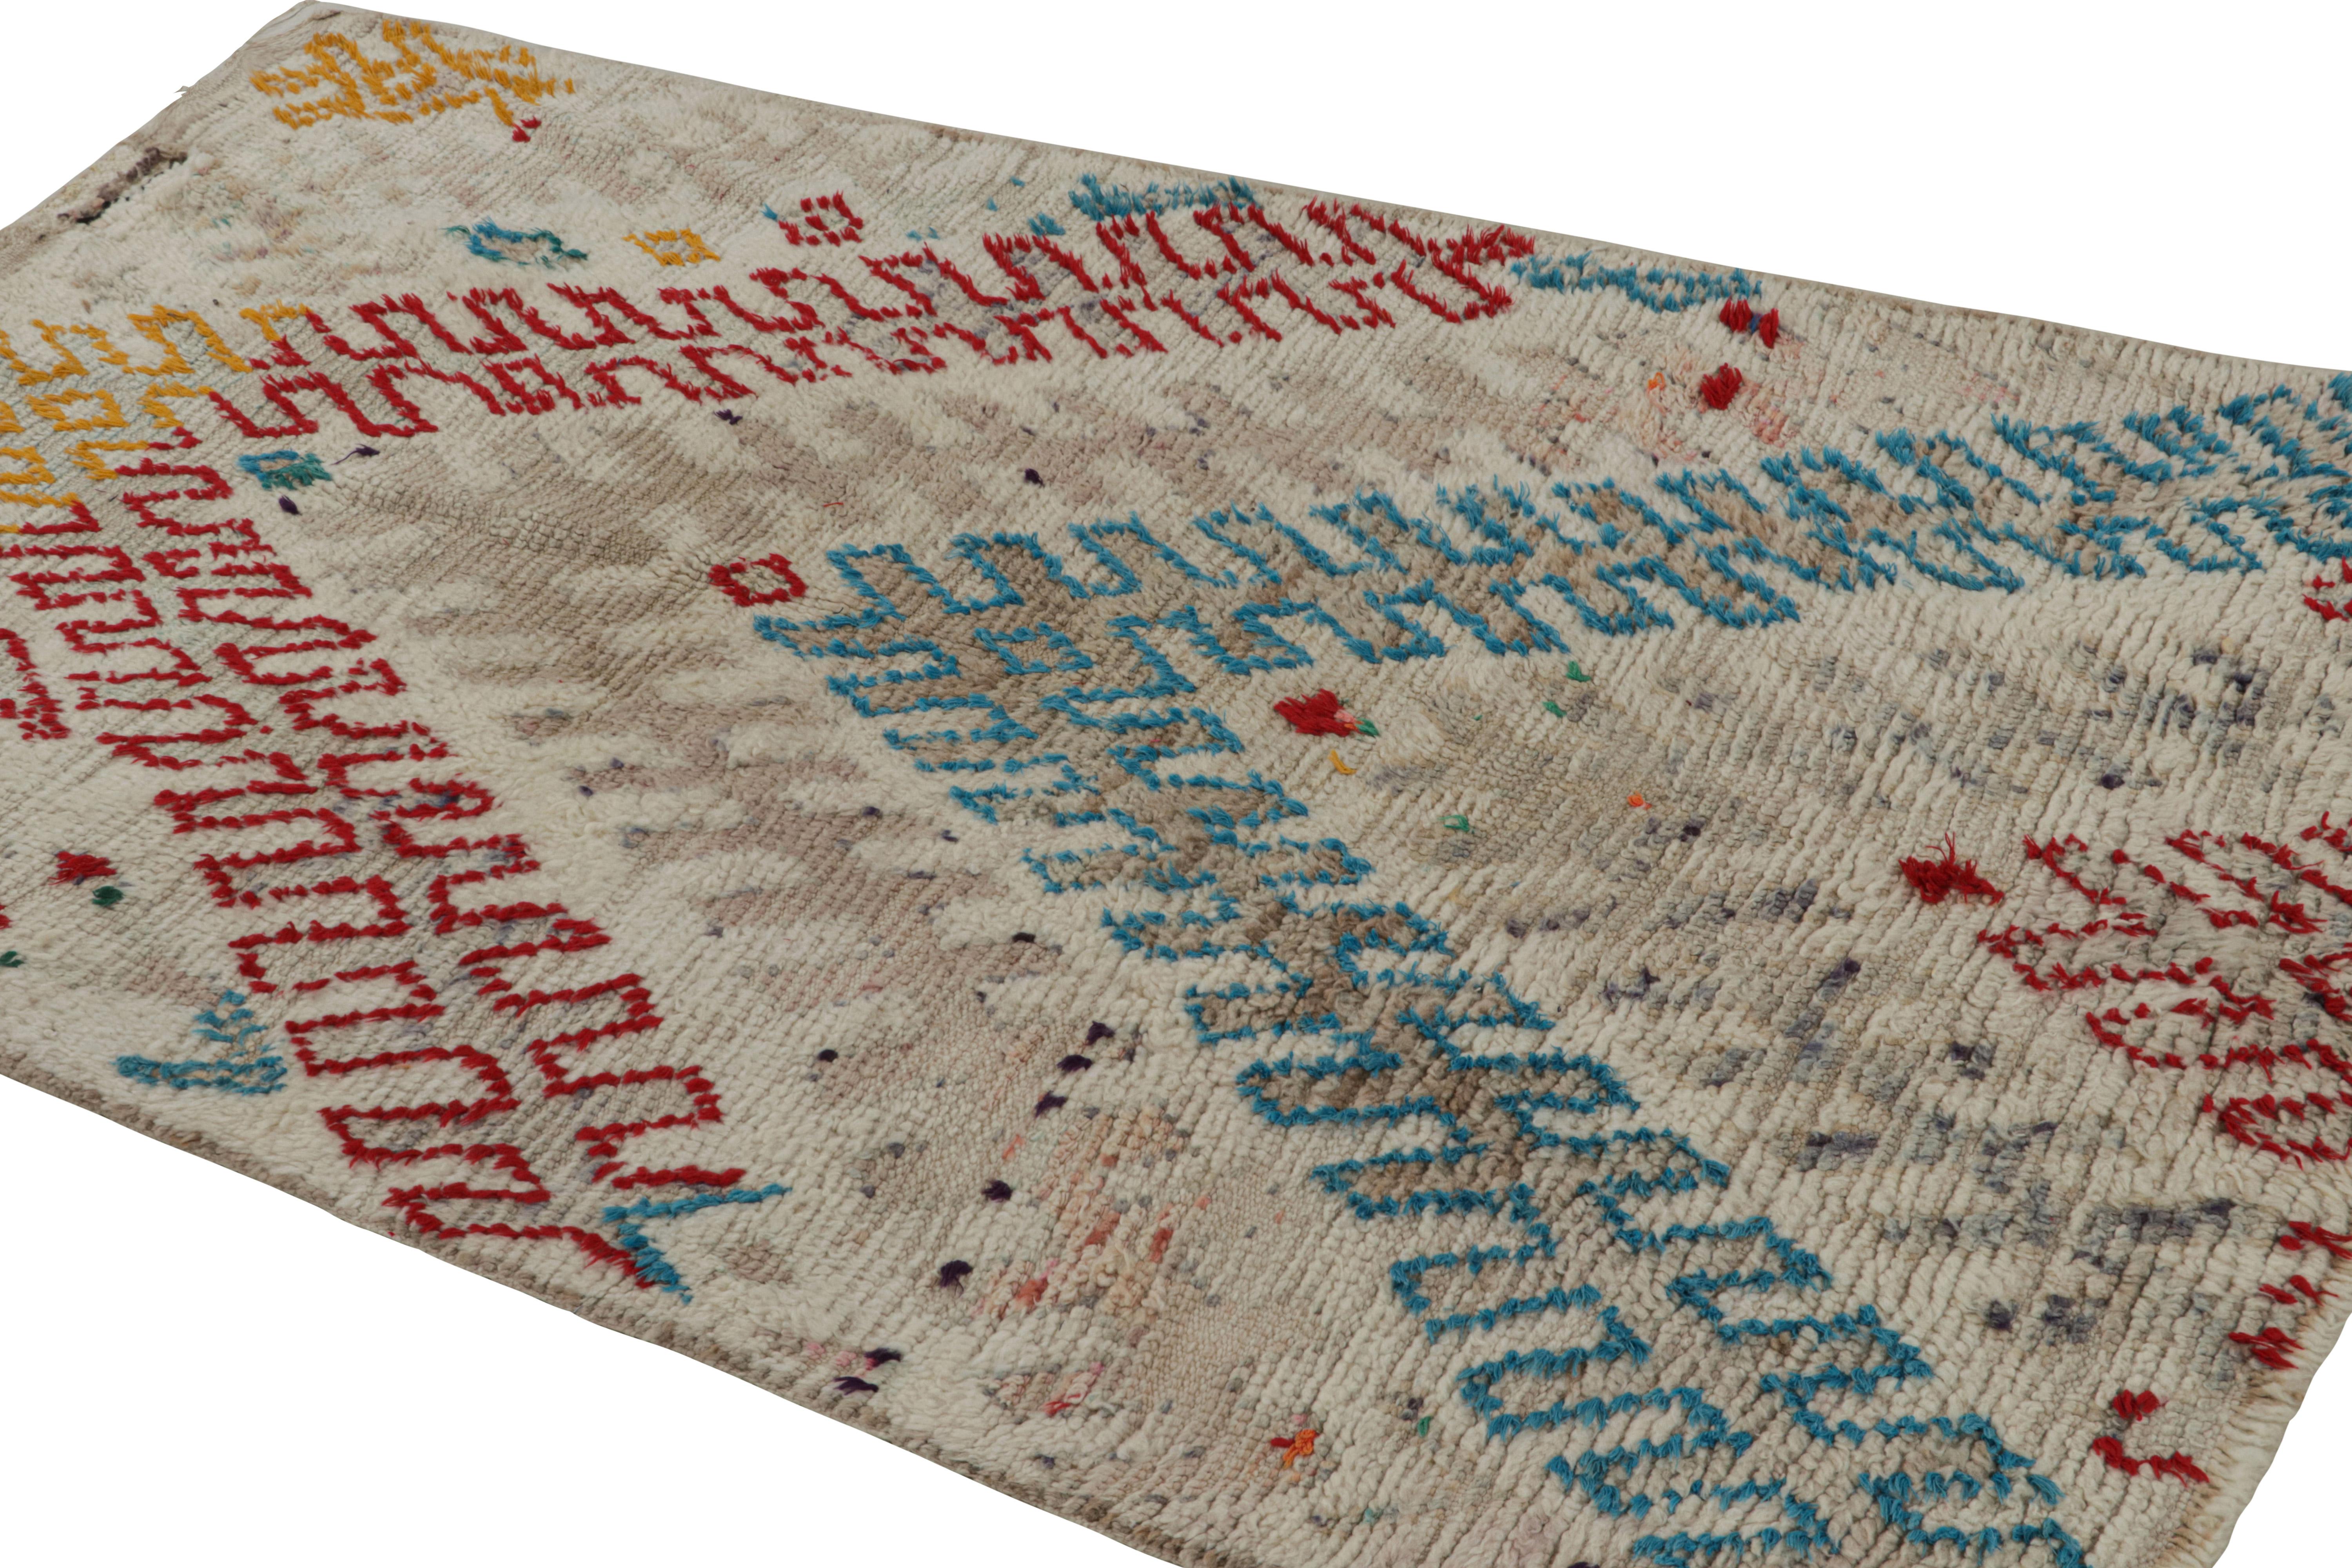 Hand-knotted in wool circa 1950-1960, this vintage 4x7 Moroccan rug is believed to hail from the Azilal tribe. 

On the Design: 

This rug enjoys polychromatic patterns on a comfortable white background. Keen eyes will further admire its healthy